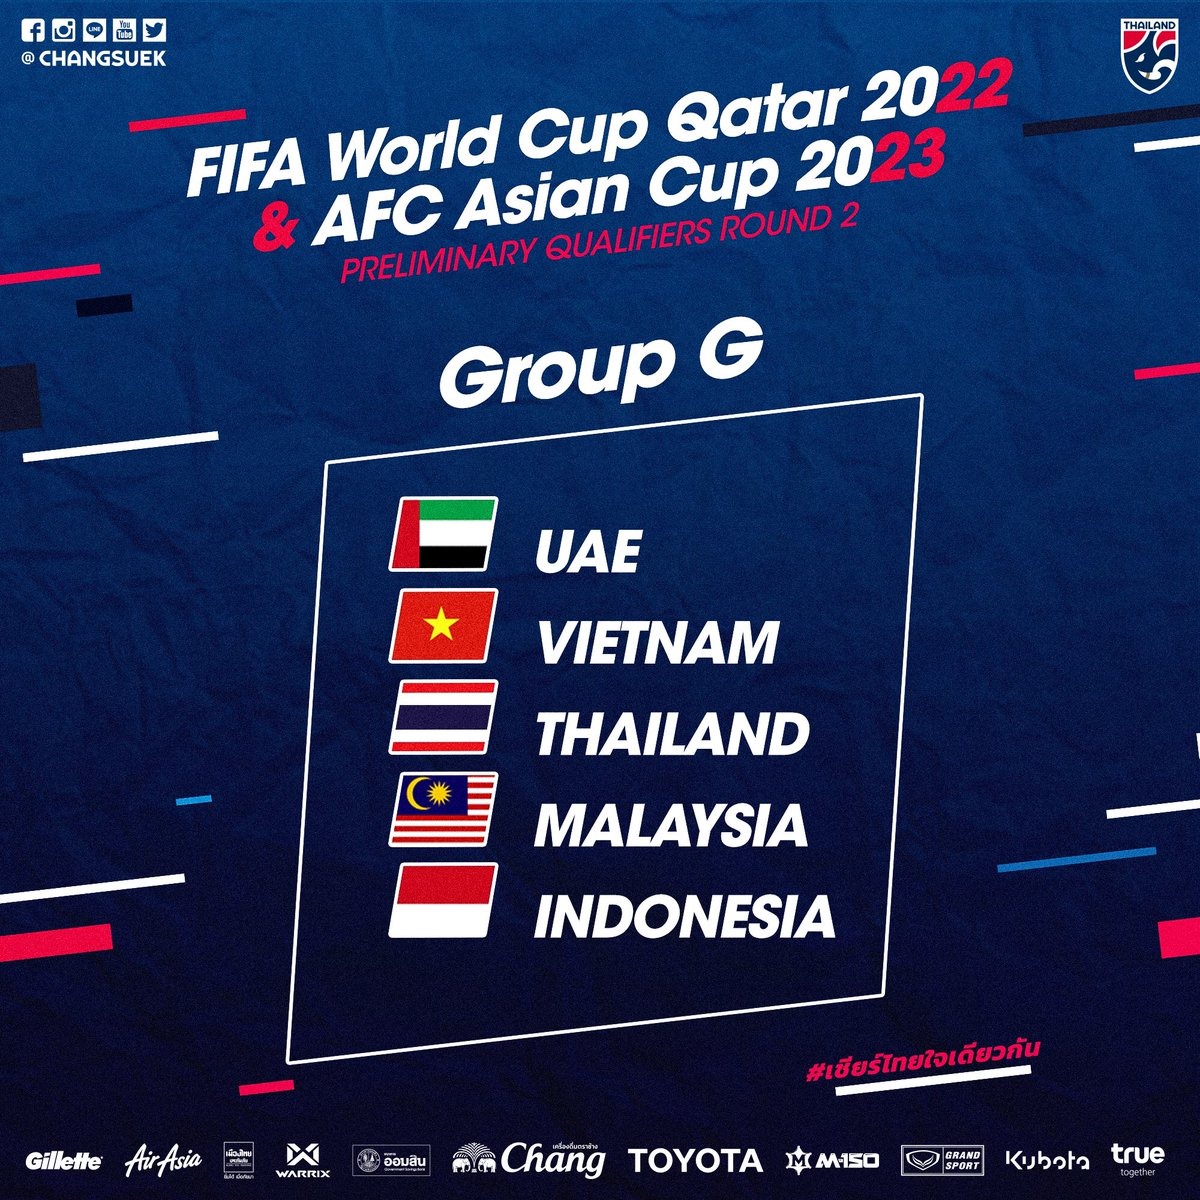 Unbelievable: 4 ASEAN teams in the same group for World Cup 2022 second